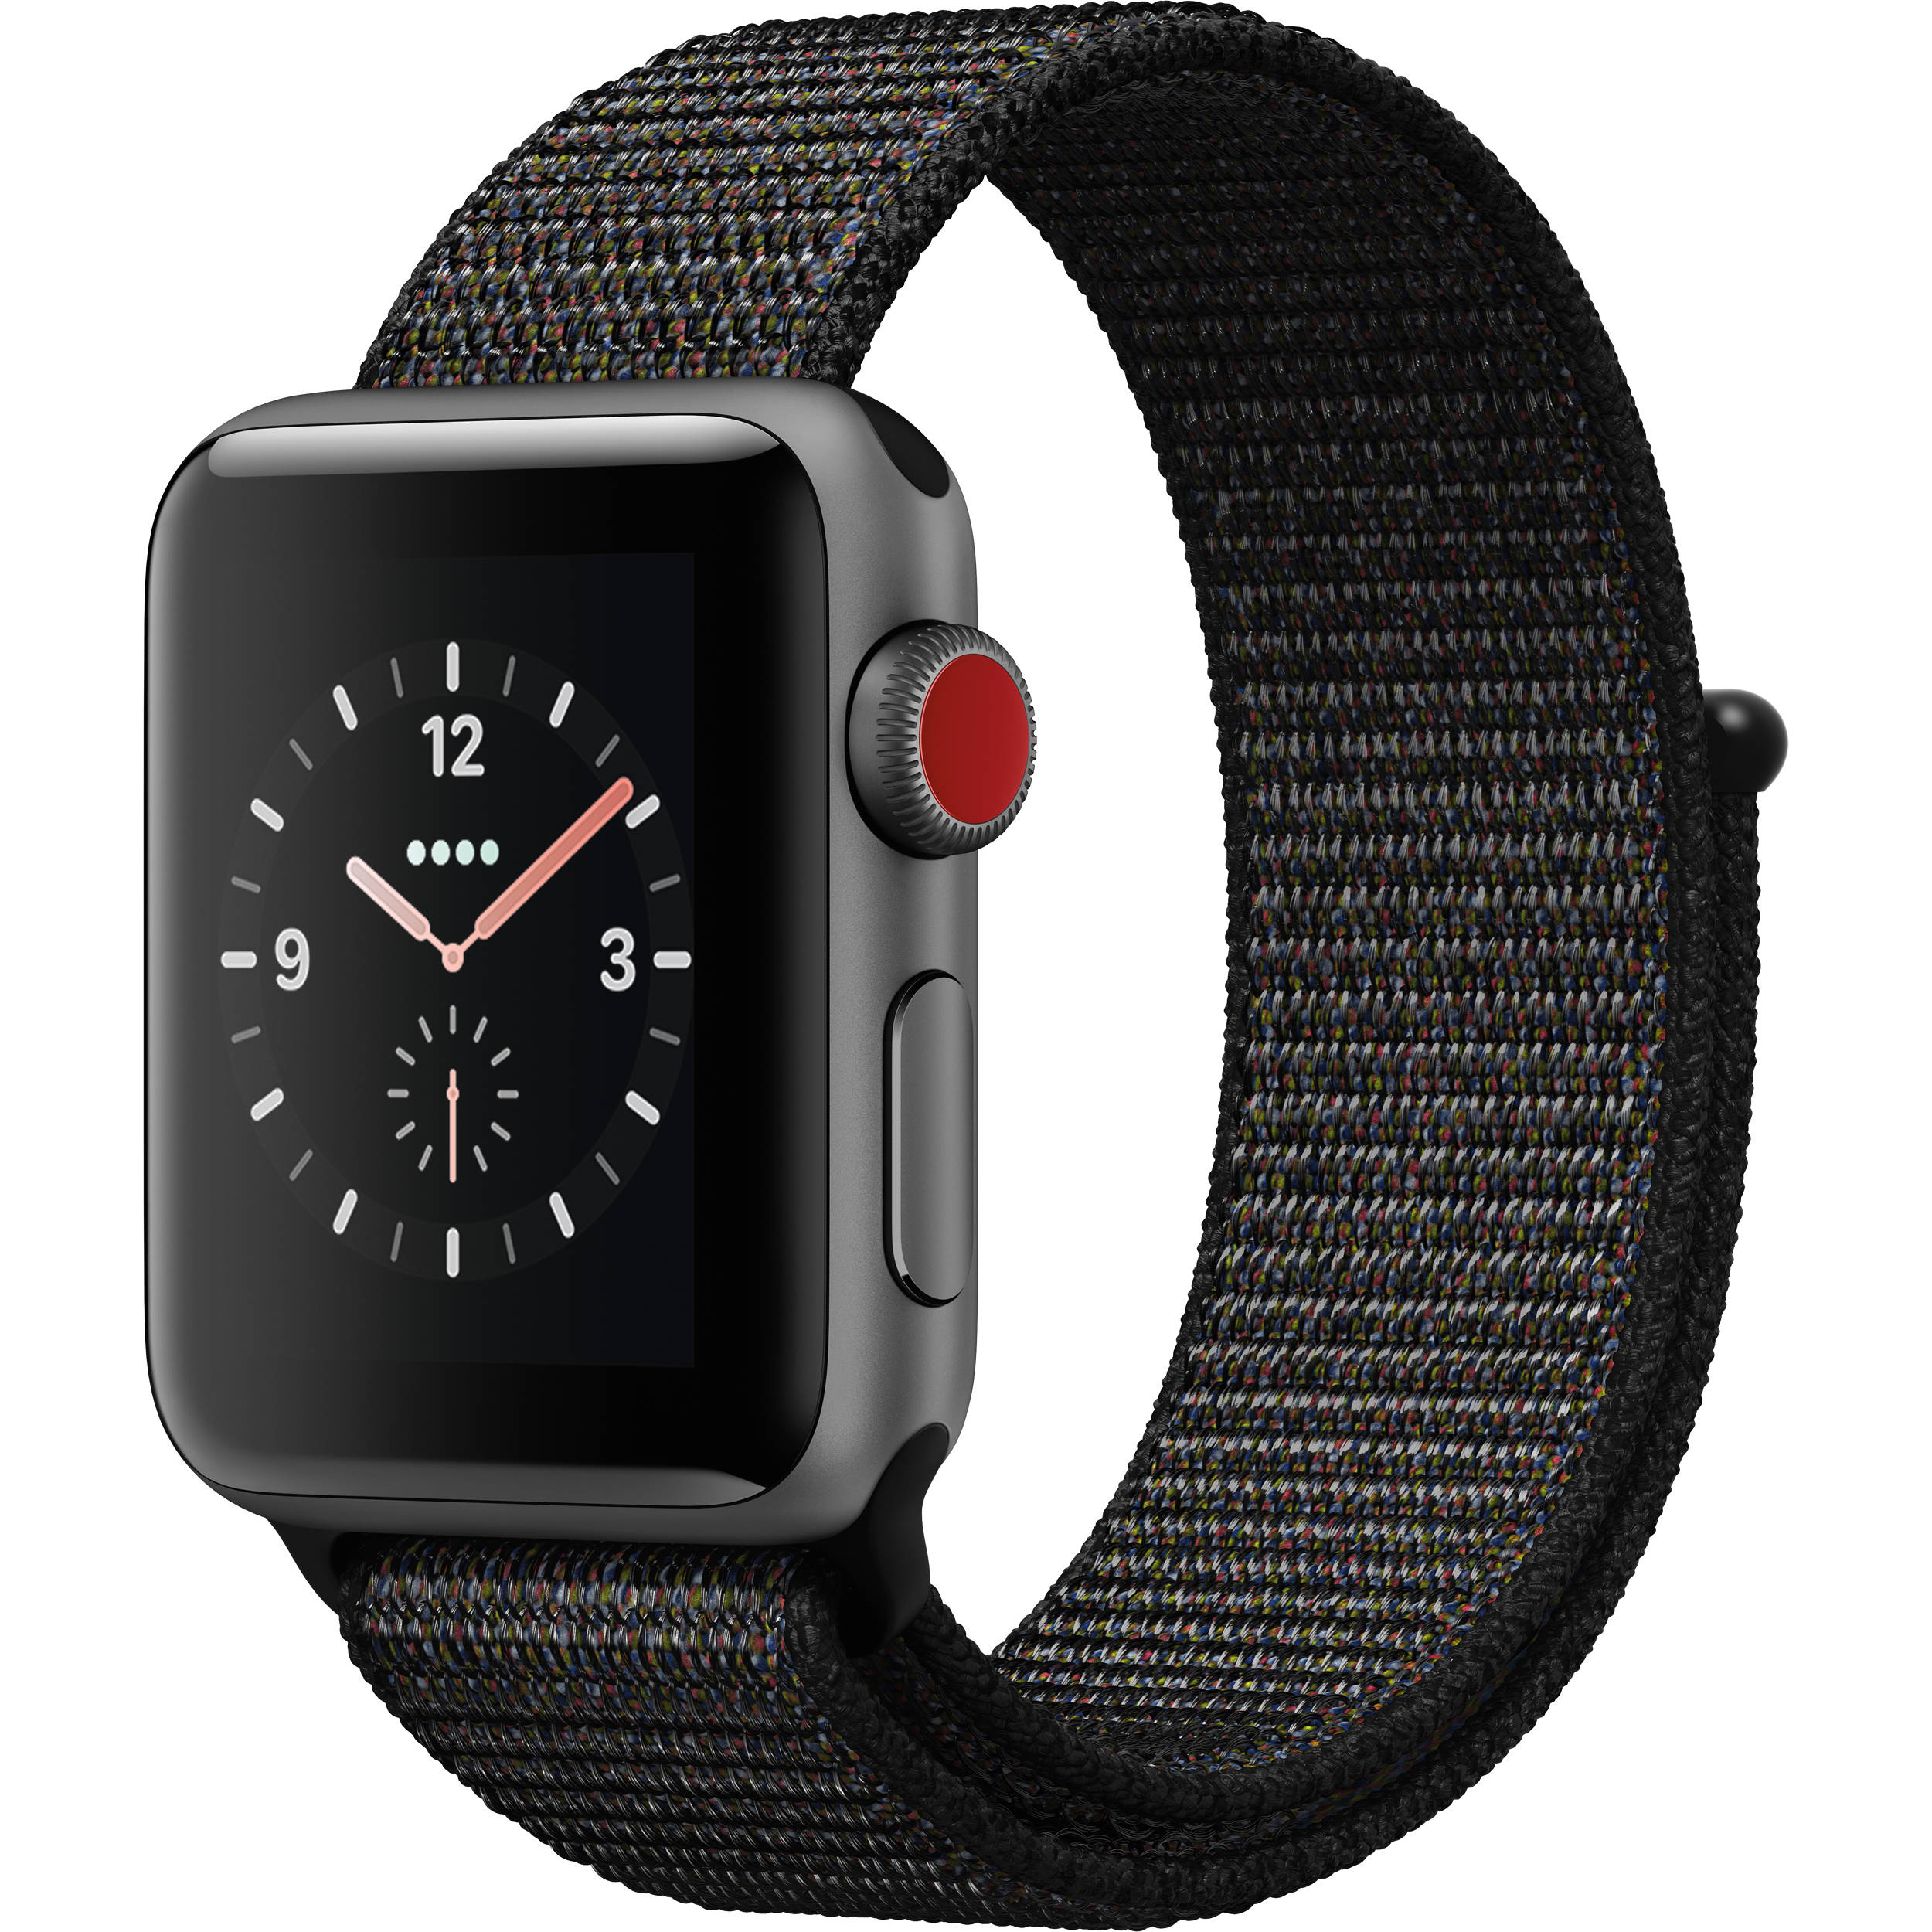 apple watch series 3 not connecting to cellular